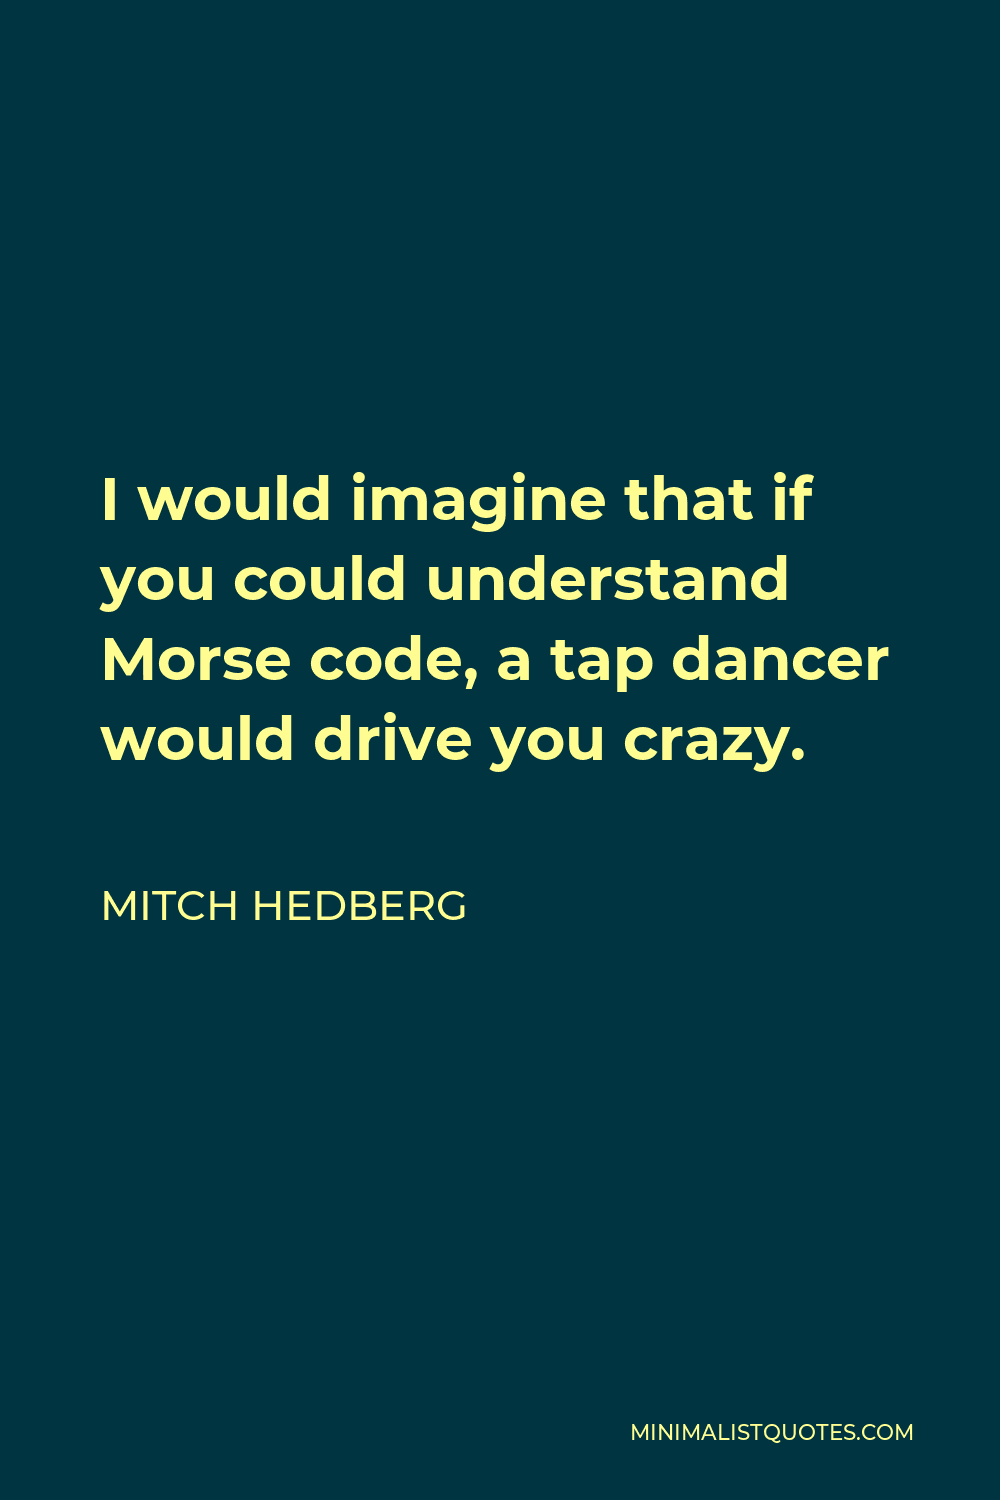 Mitch Hedberg Quote - I would imagine that if you could understand Morse code, a tap dancer would drive you crazy.